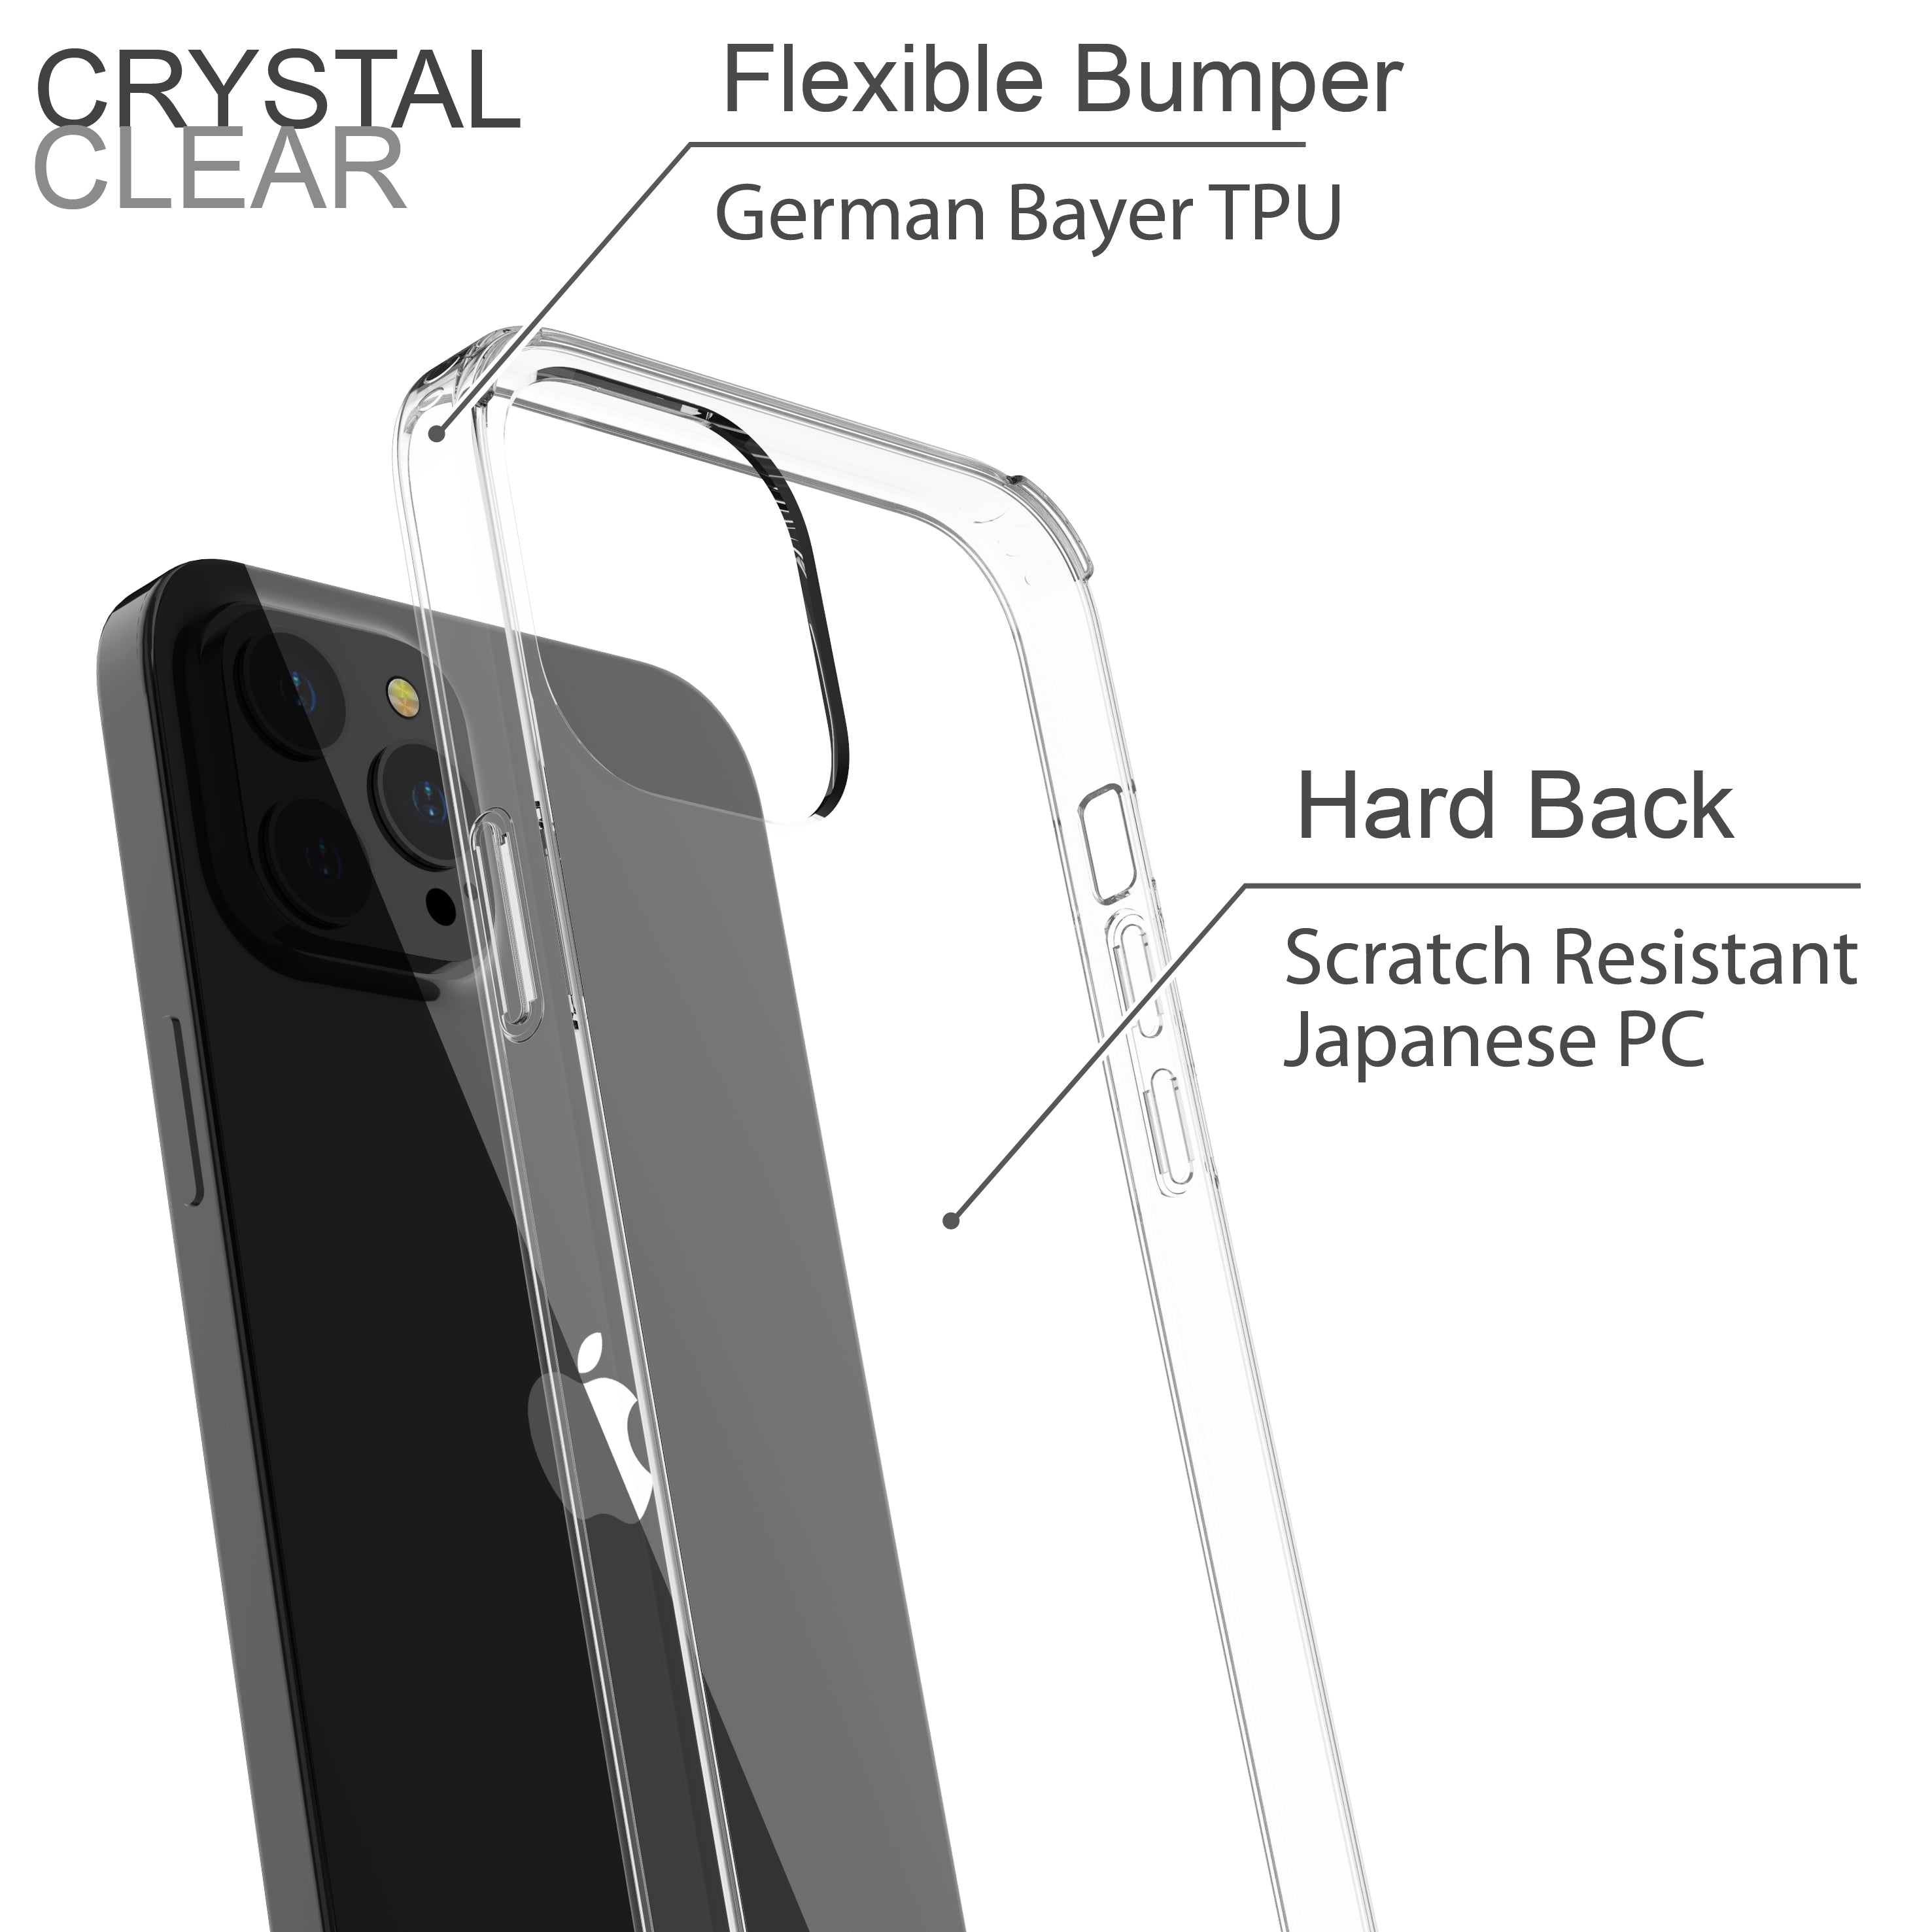 LIQUID GLASS Clear Case for Apple iPhone 12 and iPhone 12 Pro (6.1") 2020